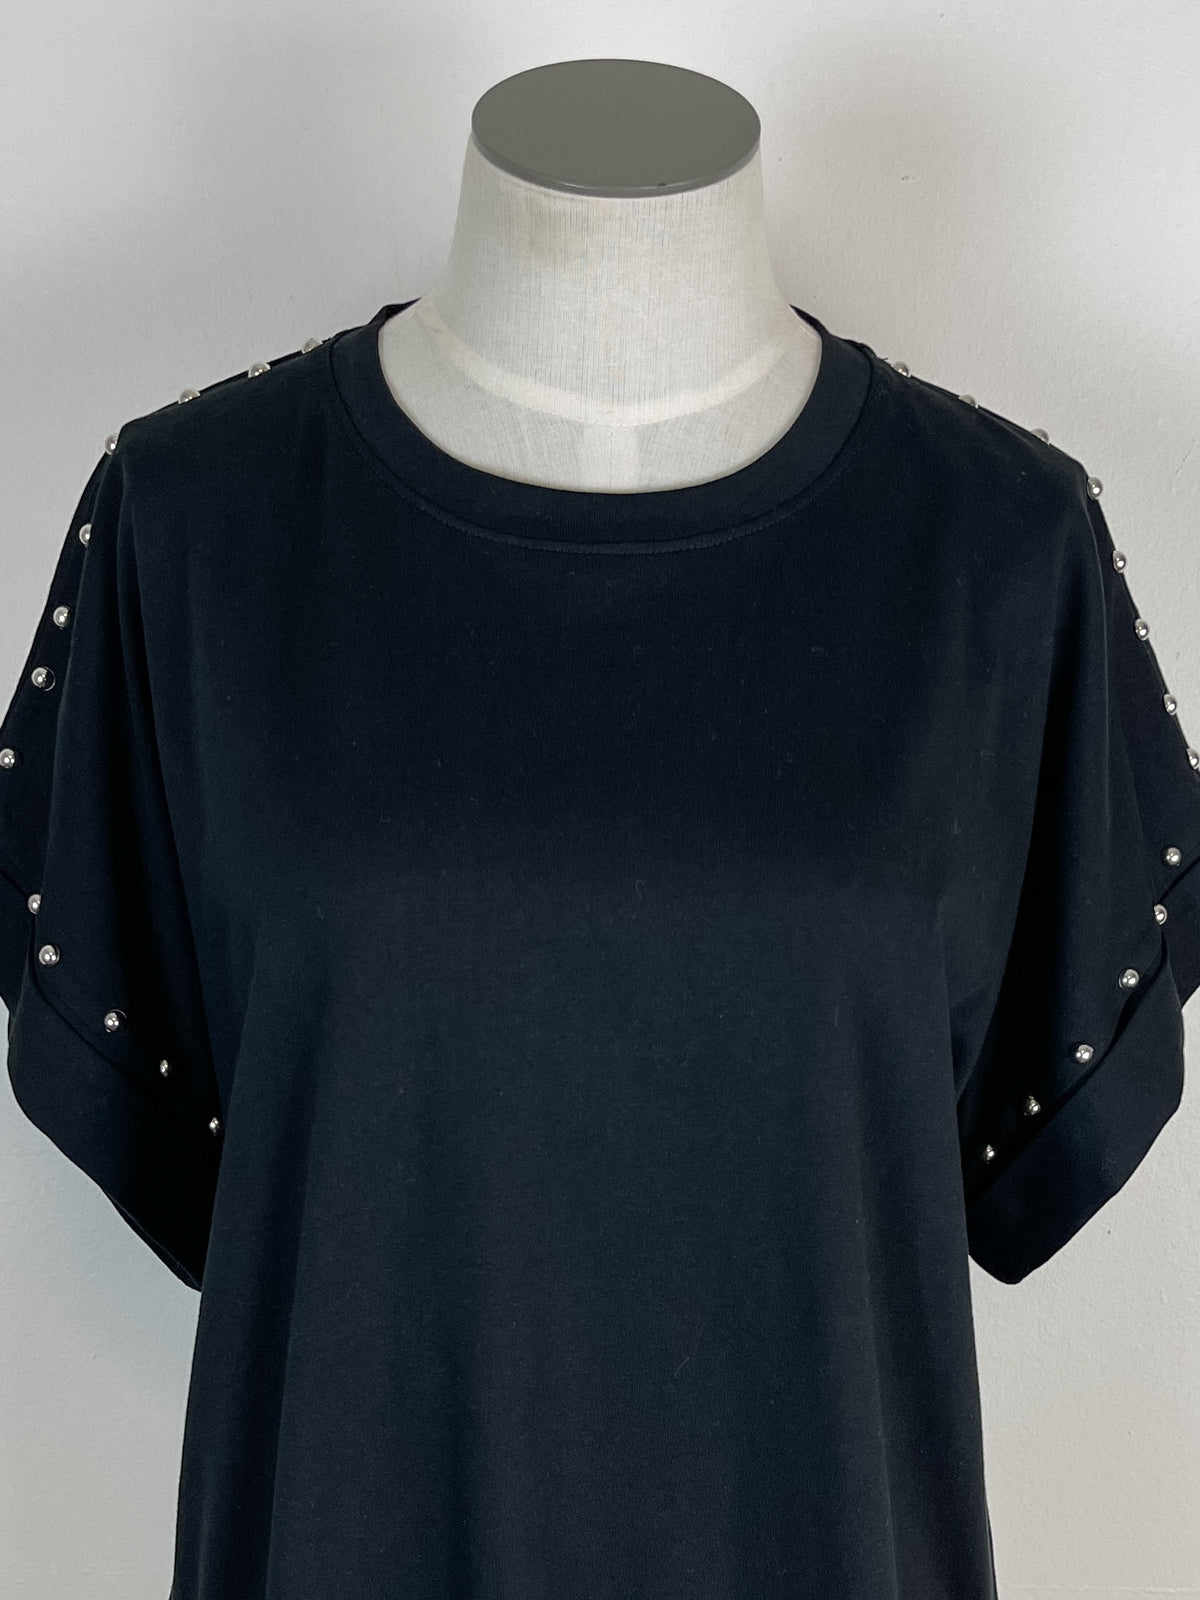 Studded Tee in Black